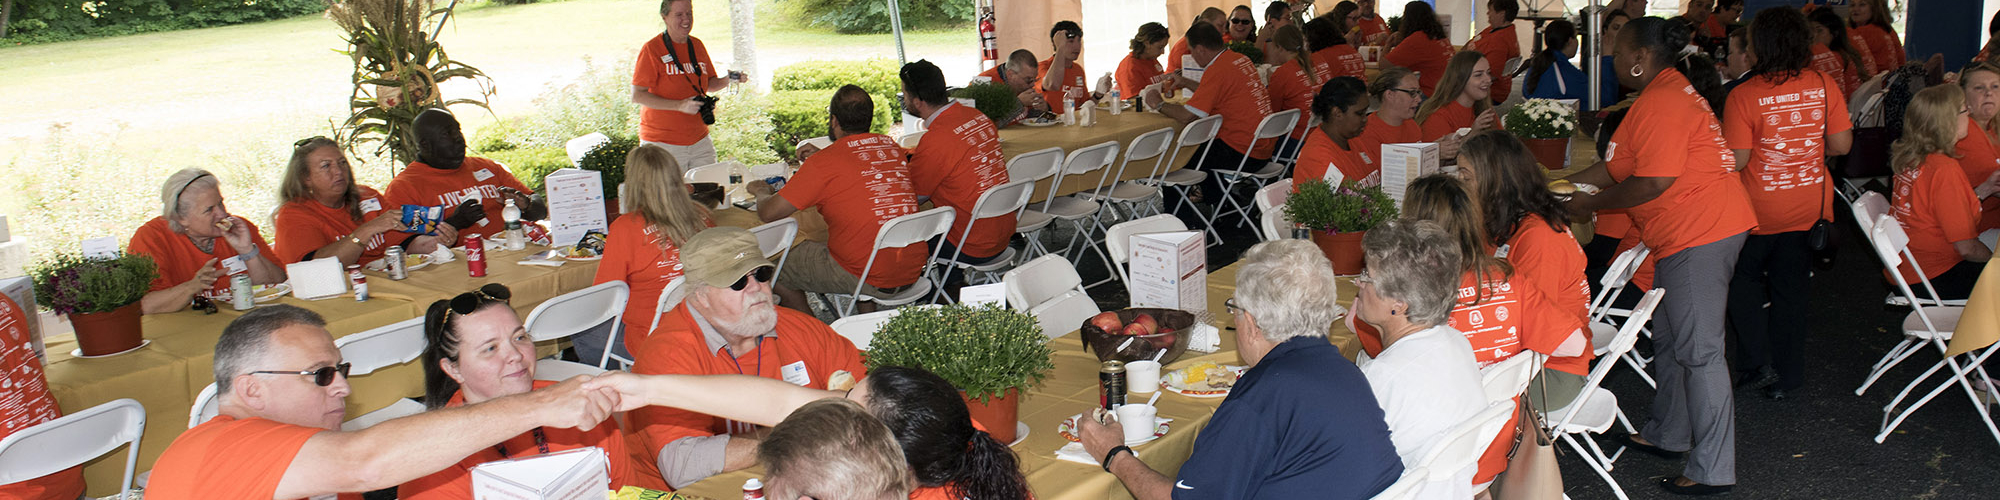 United Way supporters sitting at long tables at a cookout event